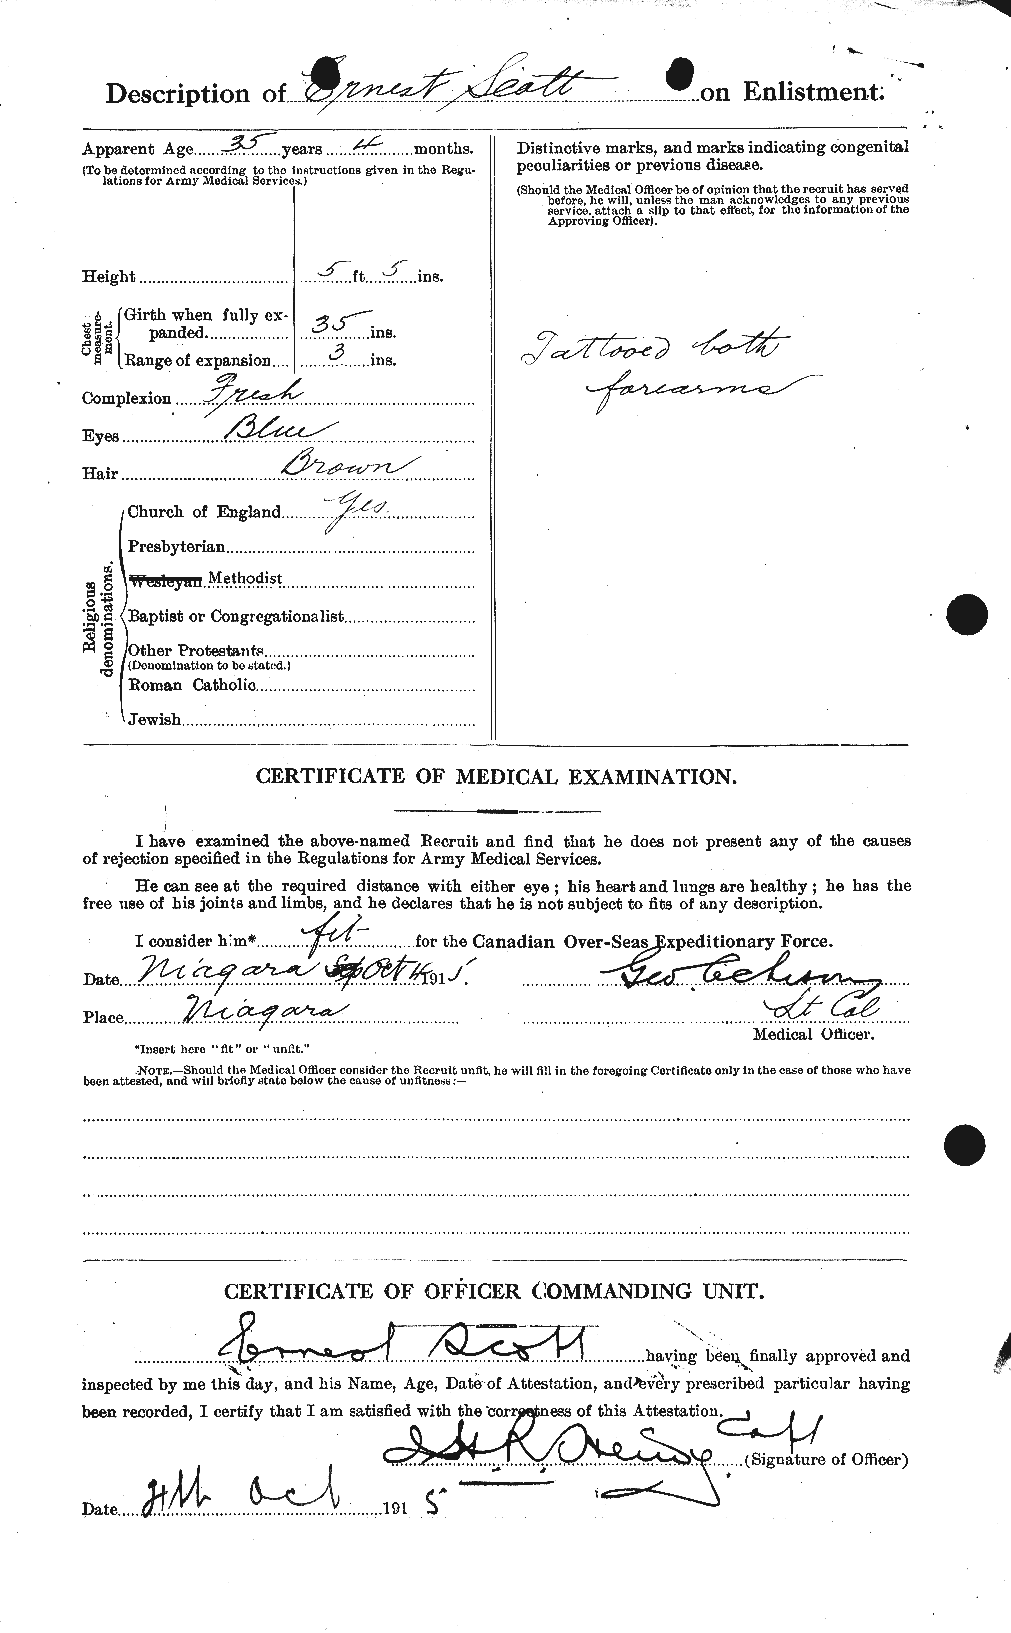 Personnel Records of the First World War - CEF 085017b